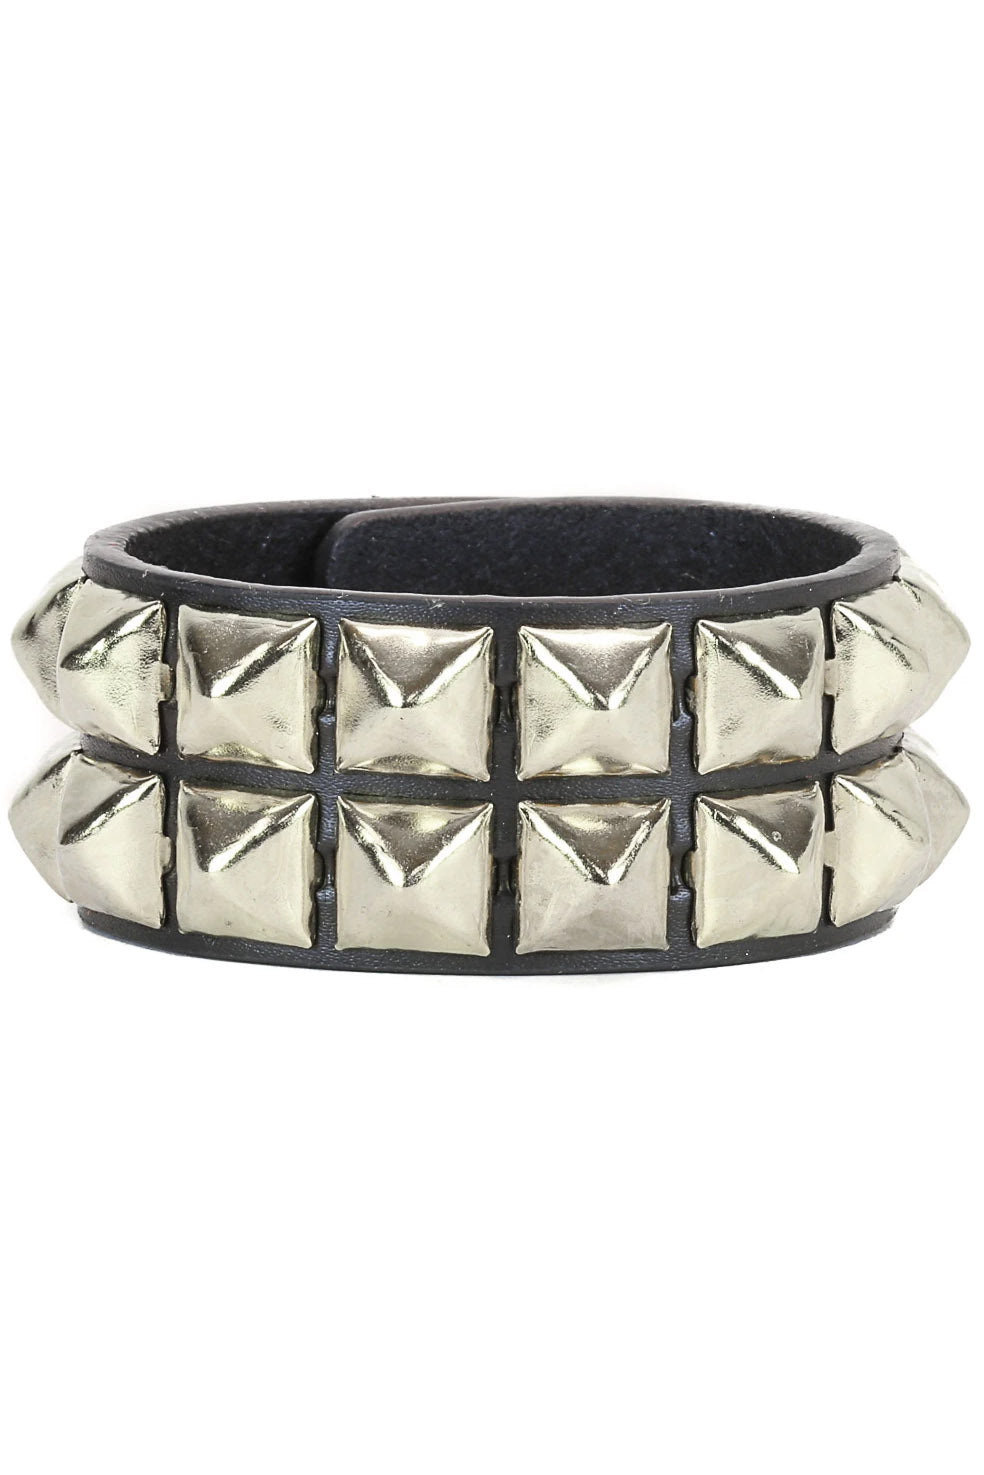 Seeing Double Pyramid Stud Bracelet [2 Rows]